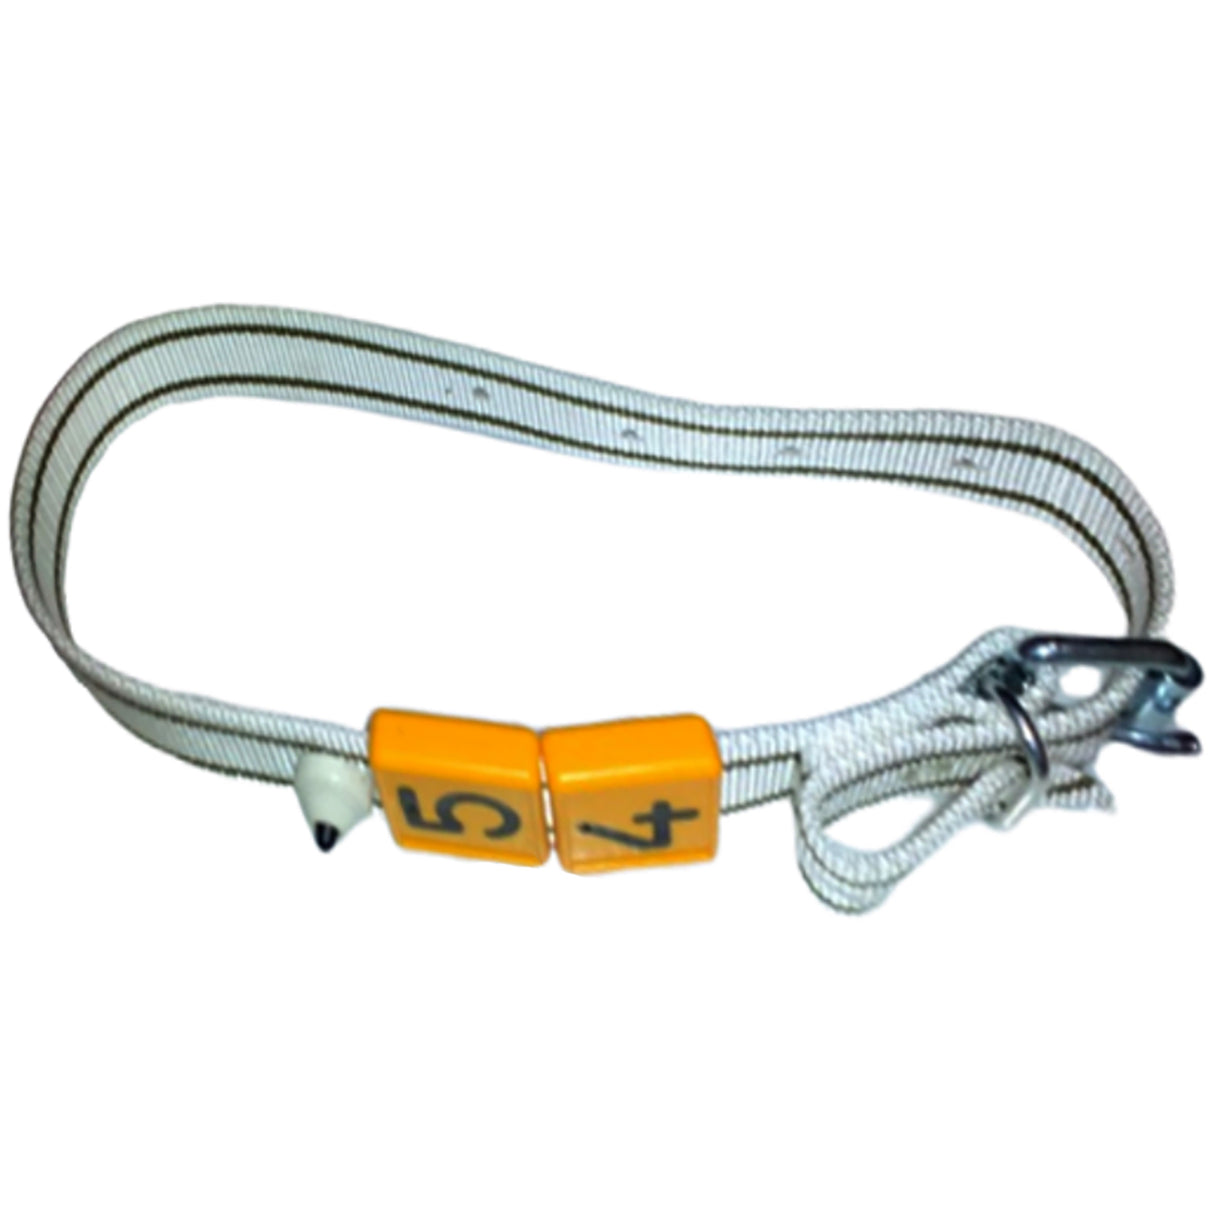 Calf collar 90 cm complete calf drink automatic transmission